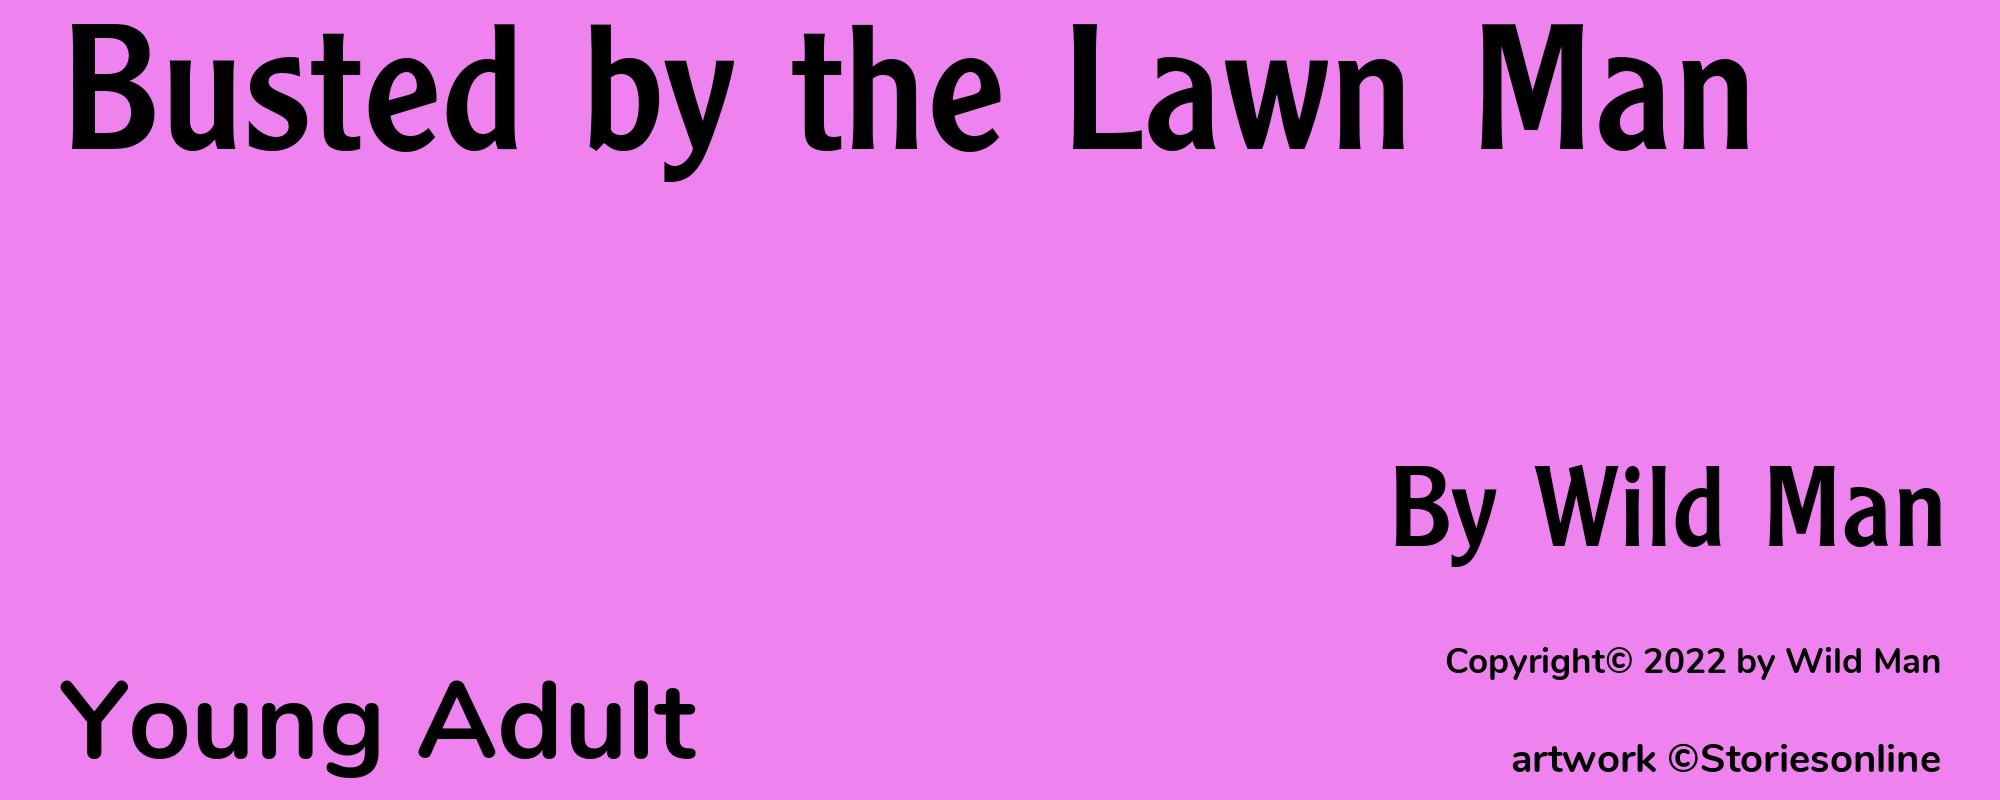 Busted by the Lawn Man - Cover